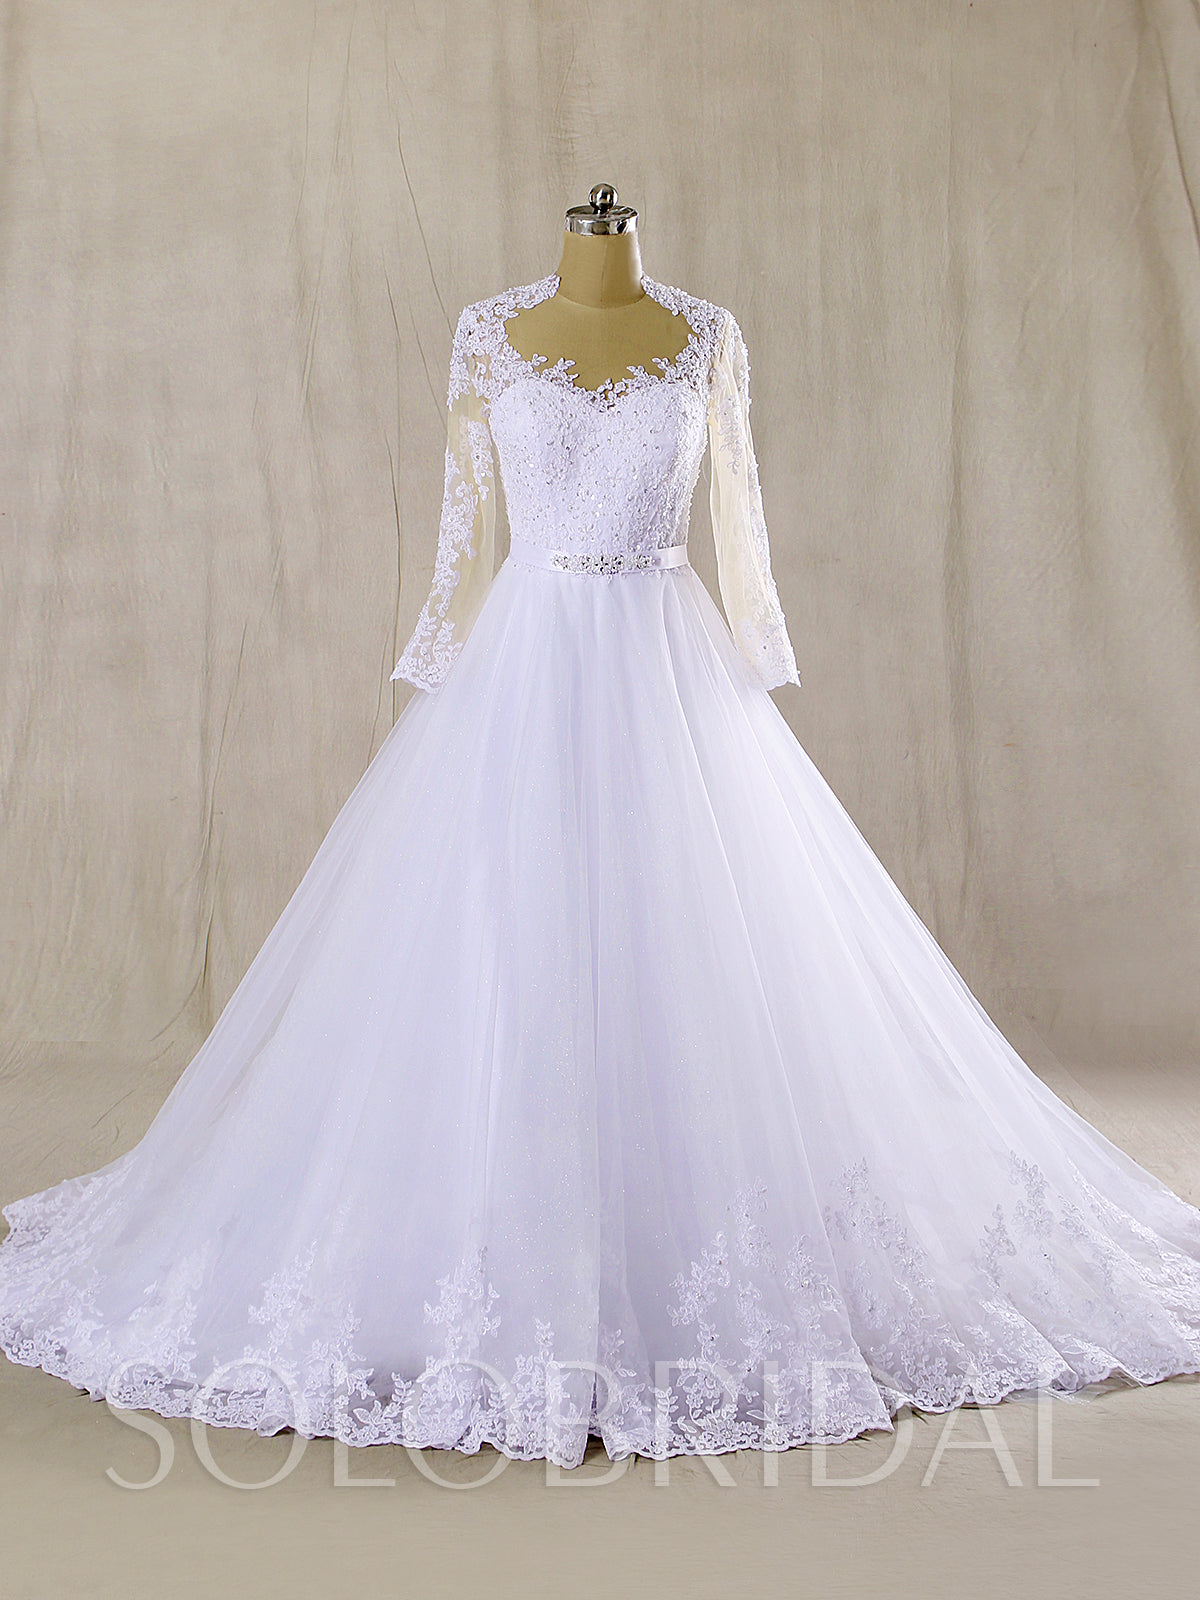 White A Line Tulle Wedding Dress with Long Sleeves and Beaded Belt